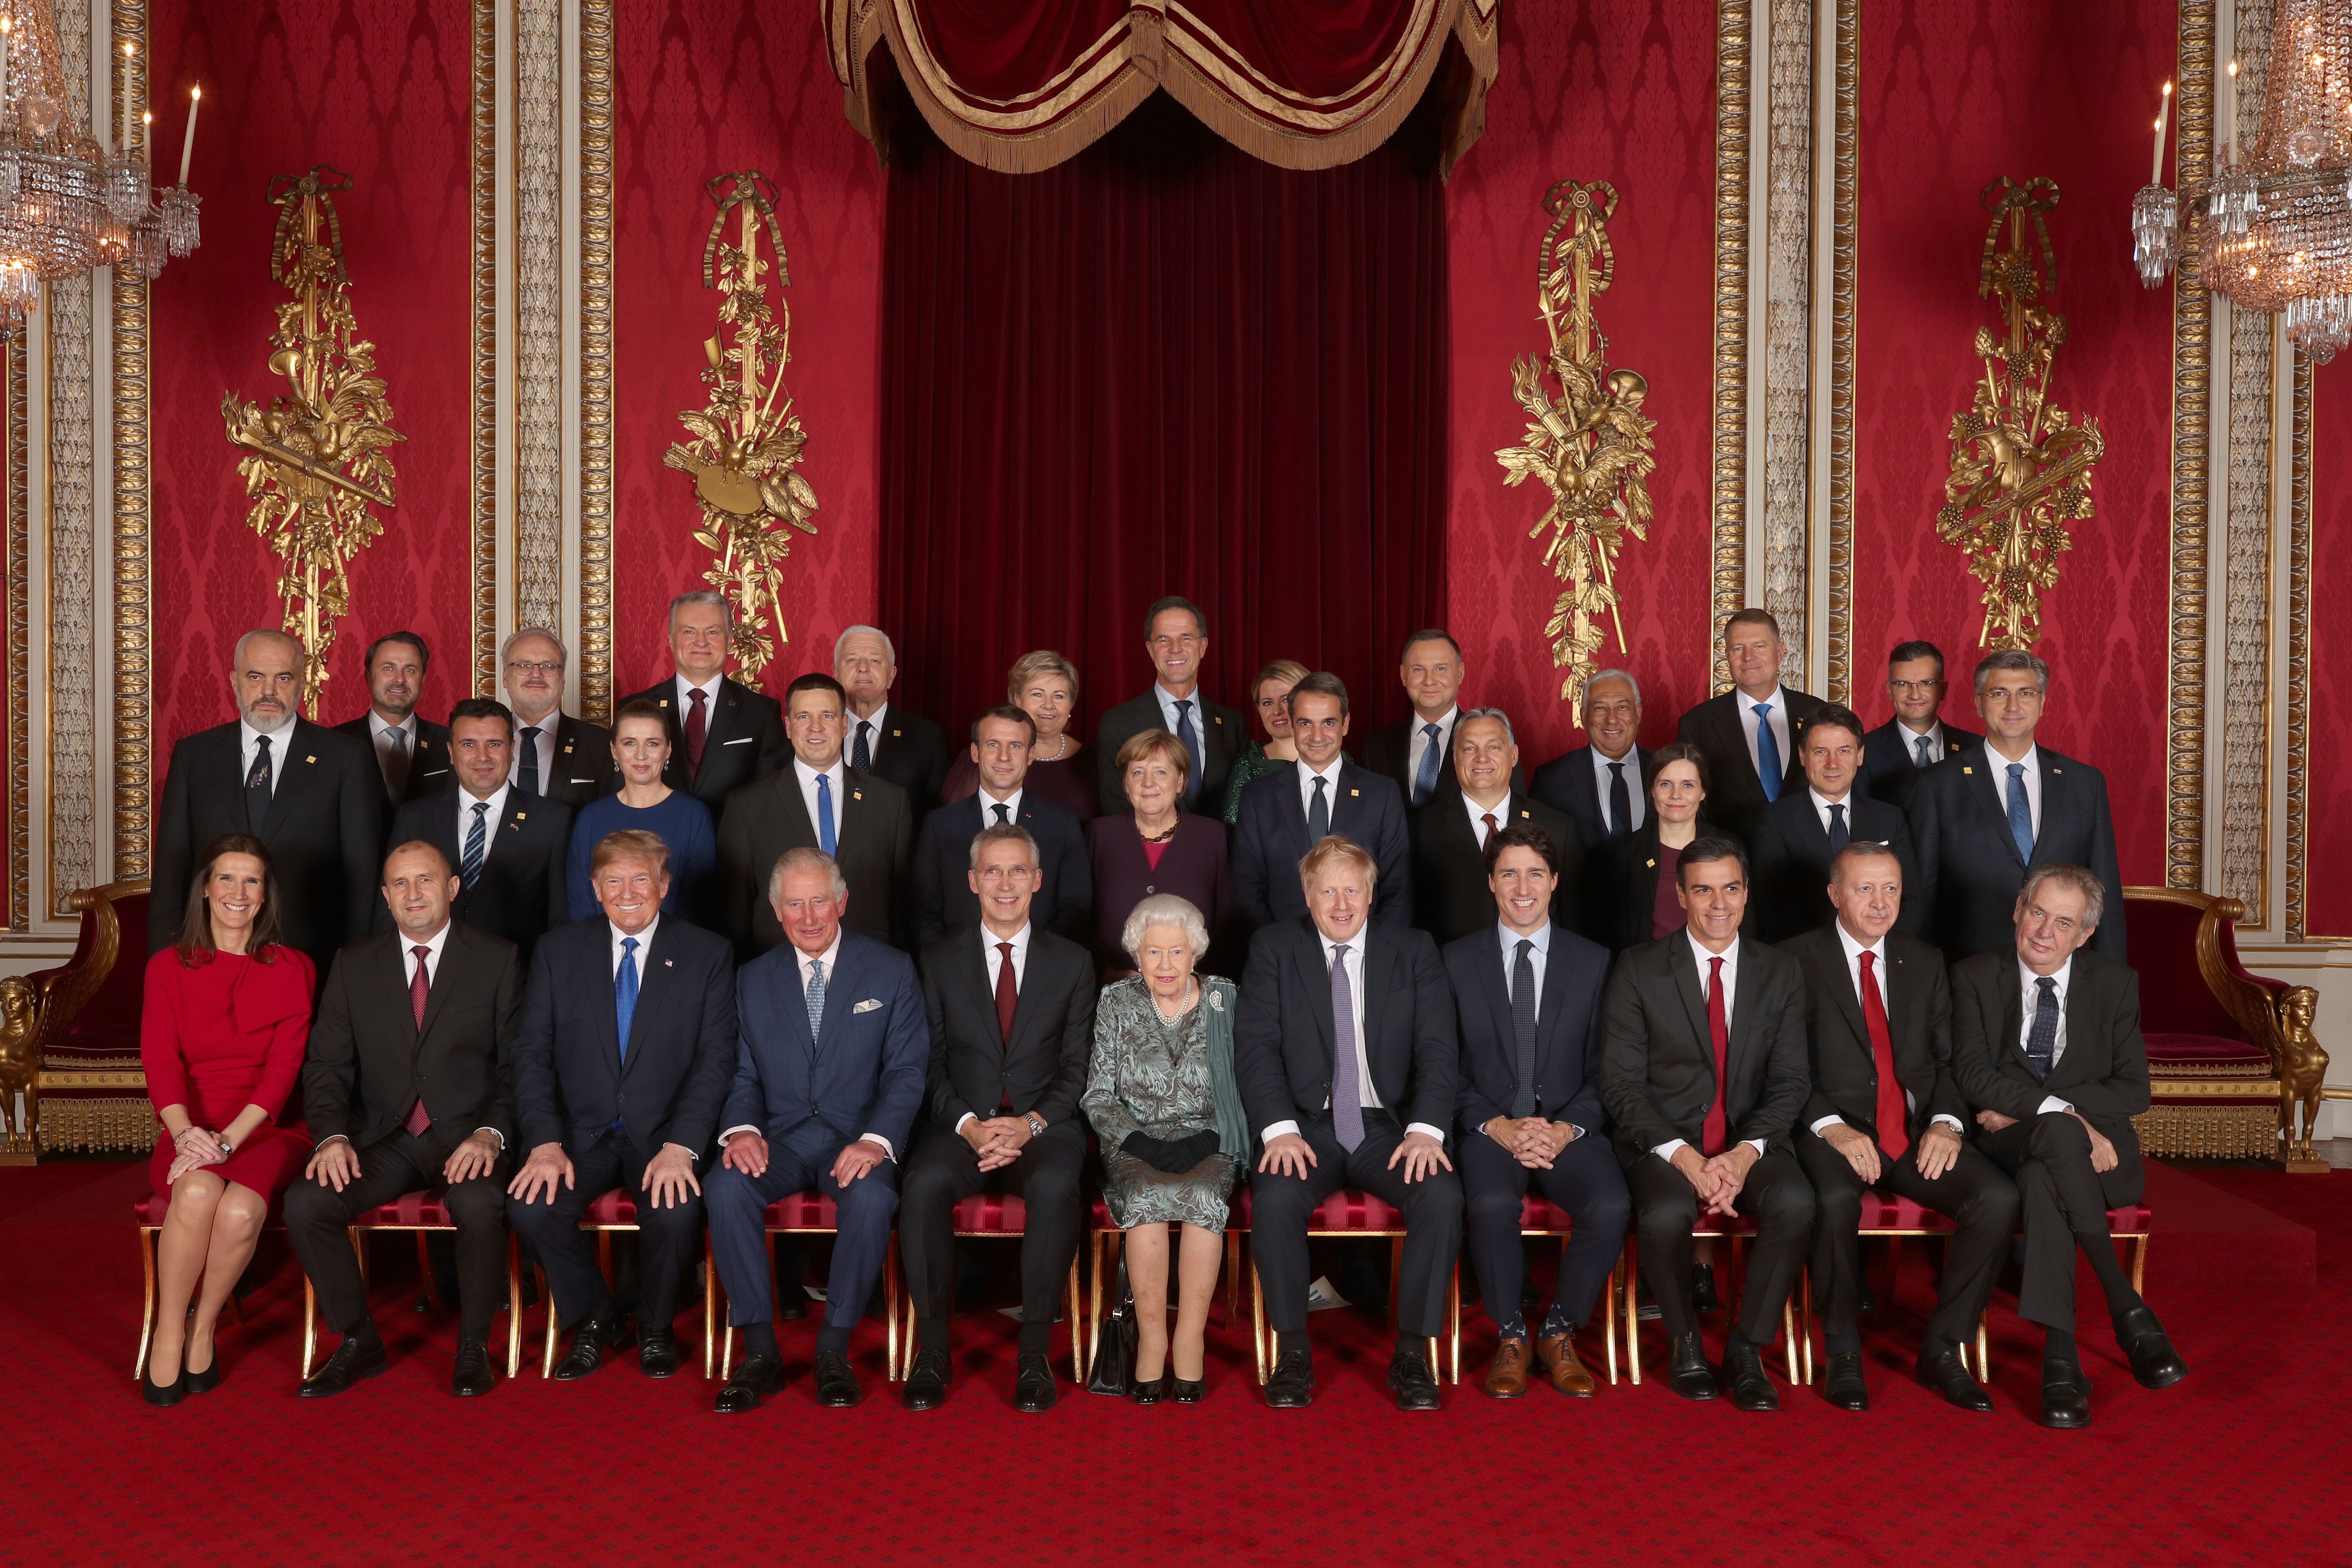 Leaders of Nato alliance countries, and its secretary general, join Queen Elizabeth and the Prince of Wales for a group picture to mark 70 years of the alliance in 2019